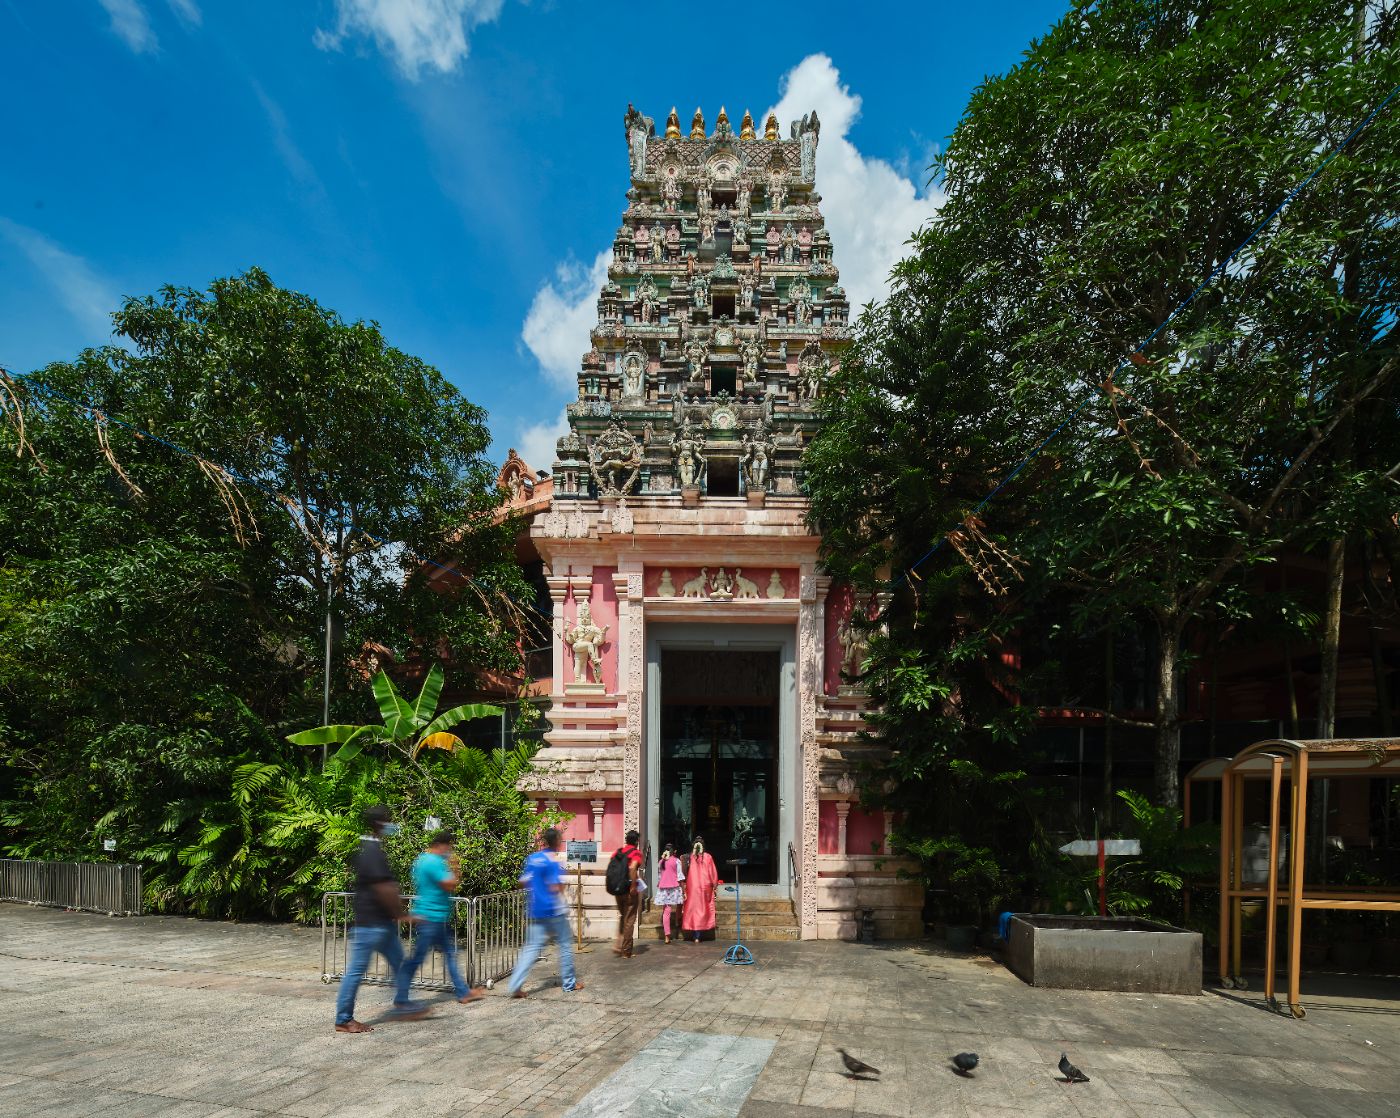 The history of Sri Arasakesari Sivan Temple dates back to the early 20th century, when it was founded as a religious and social space for Ceylonese Tamils residing in the Woodlands area. 